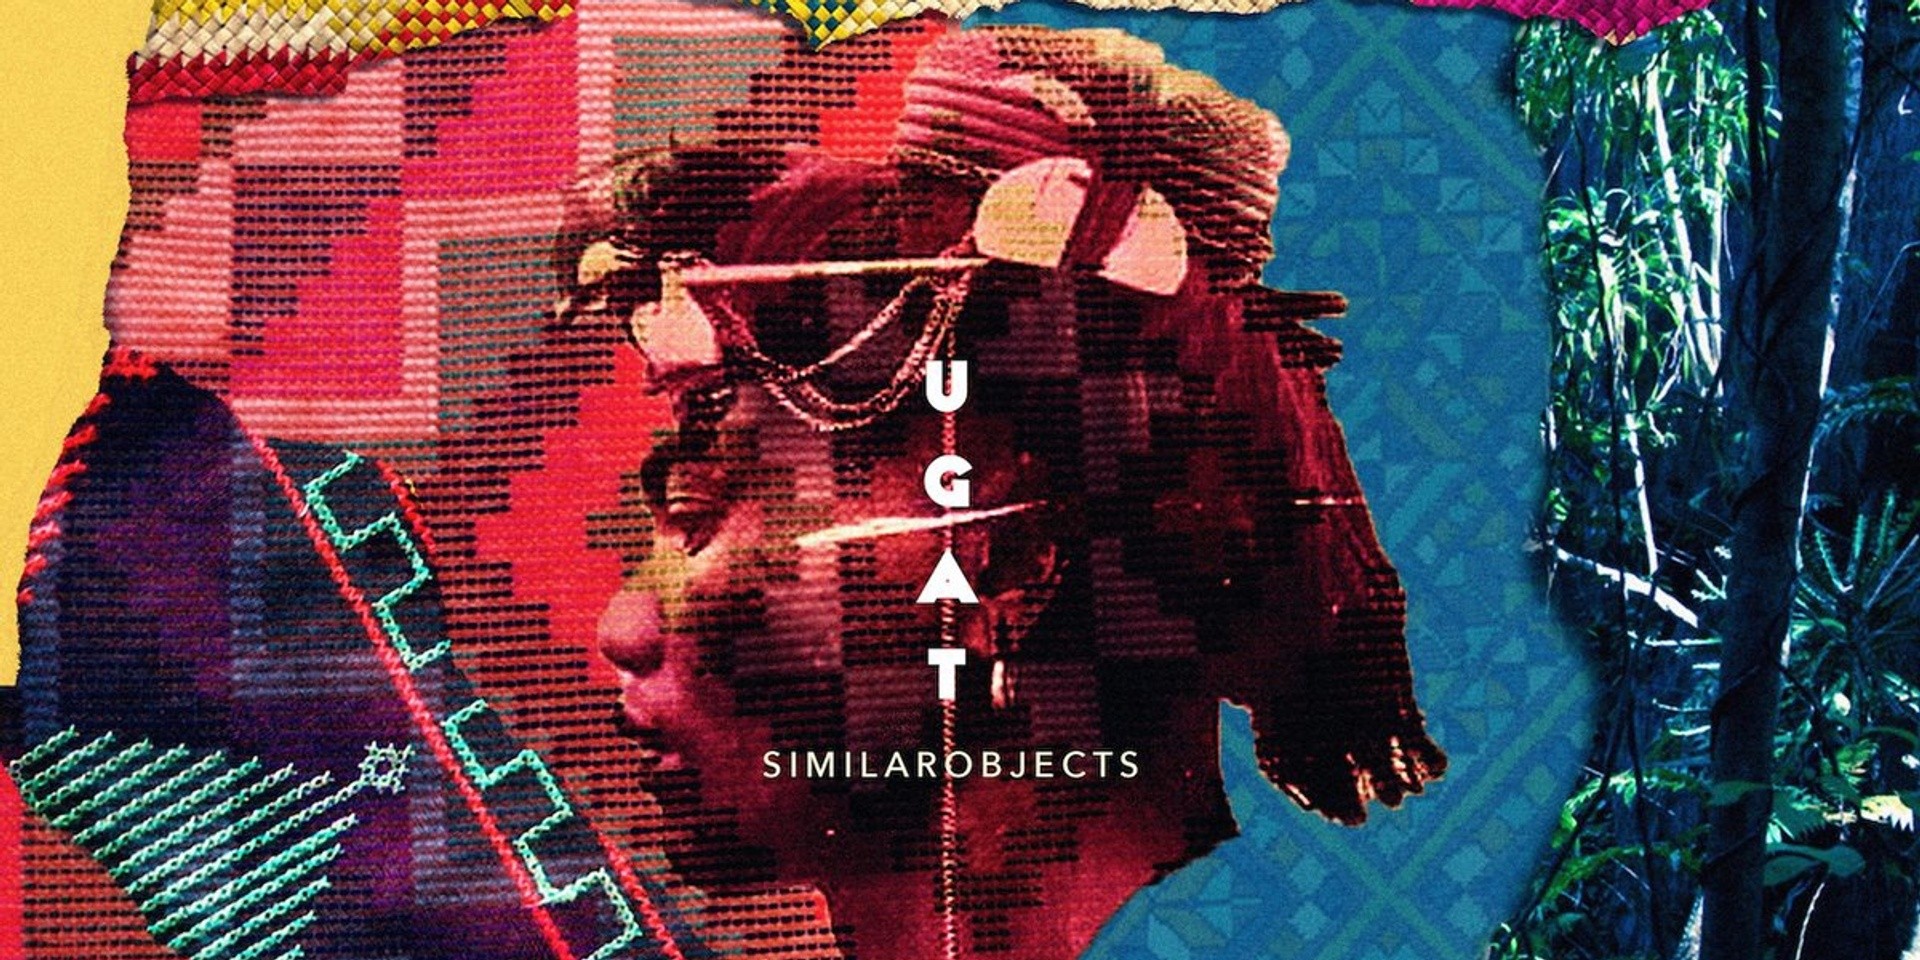 similarobjects ends 2017 with new EP, UGAT – listen